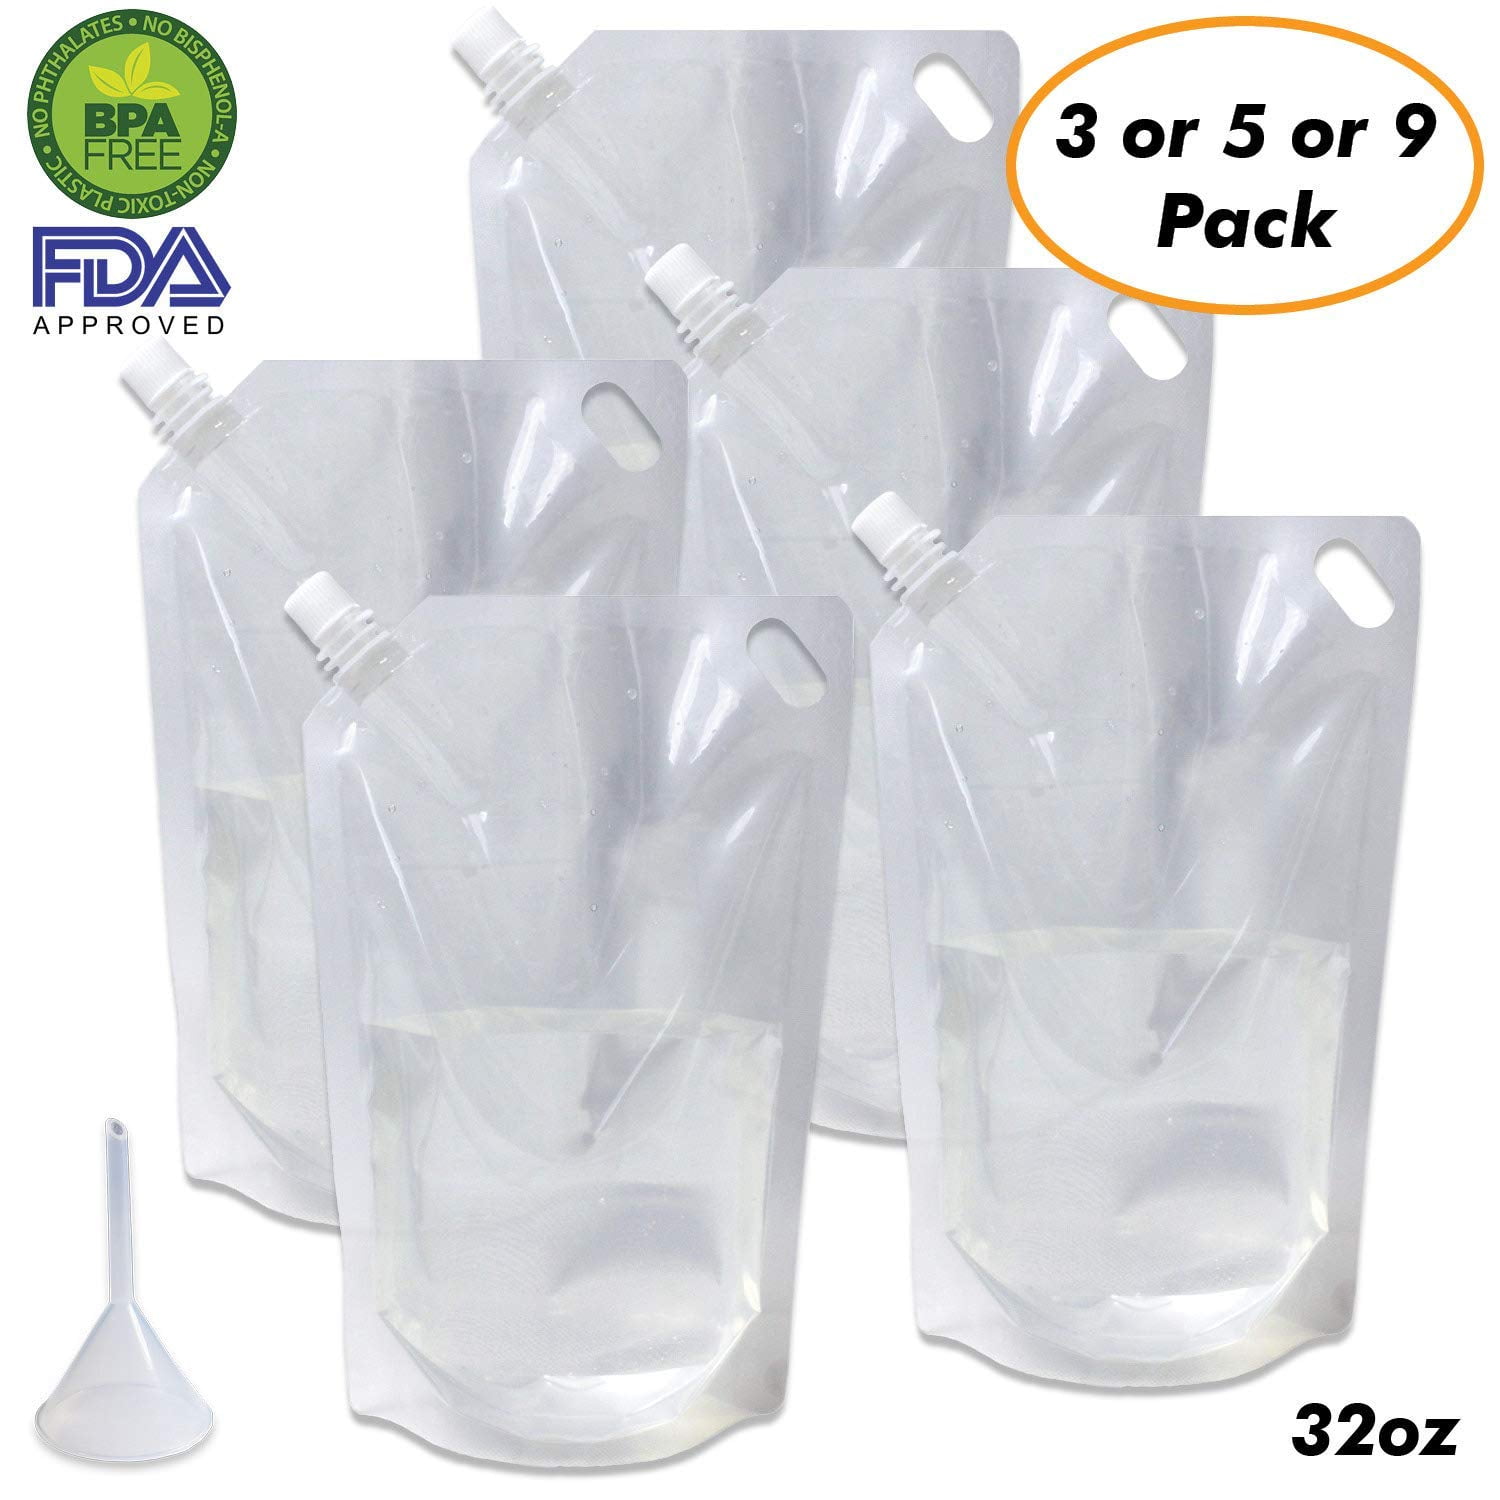 20 Pcs Liquor Flasks Cruise Pouch Reusable Sneak Travel Drinking Flask  Concealable Alcohol Plastic Flasks bags with Funnel (8 oz)